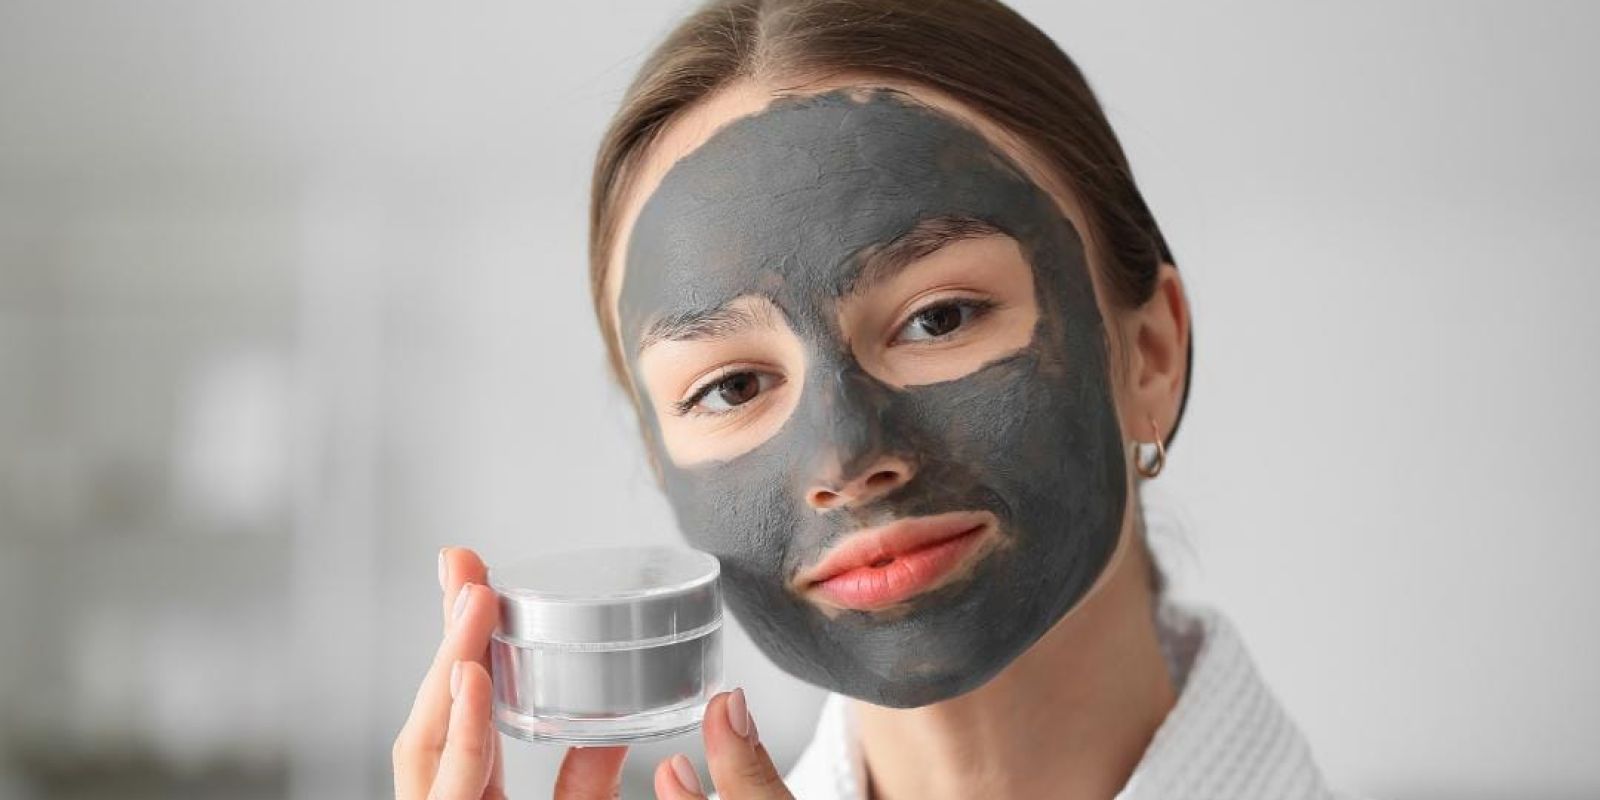 7 Incredible Benefits of Charcoal for Skin You Need to Know admin ajax.php?action=kernel&p=image&src=%7B%22file%22%3A%22wp content%2Fuploads%2F2023%2F06%2FWhatsApp Image 2023 07 01 at 13.51.49